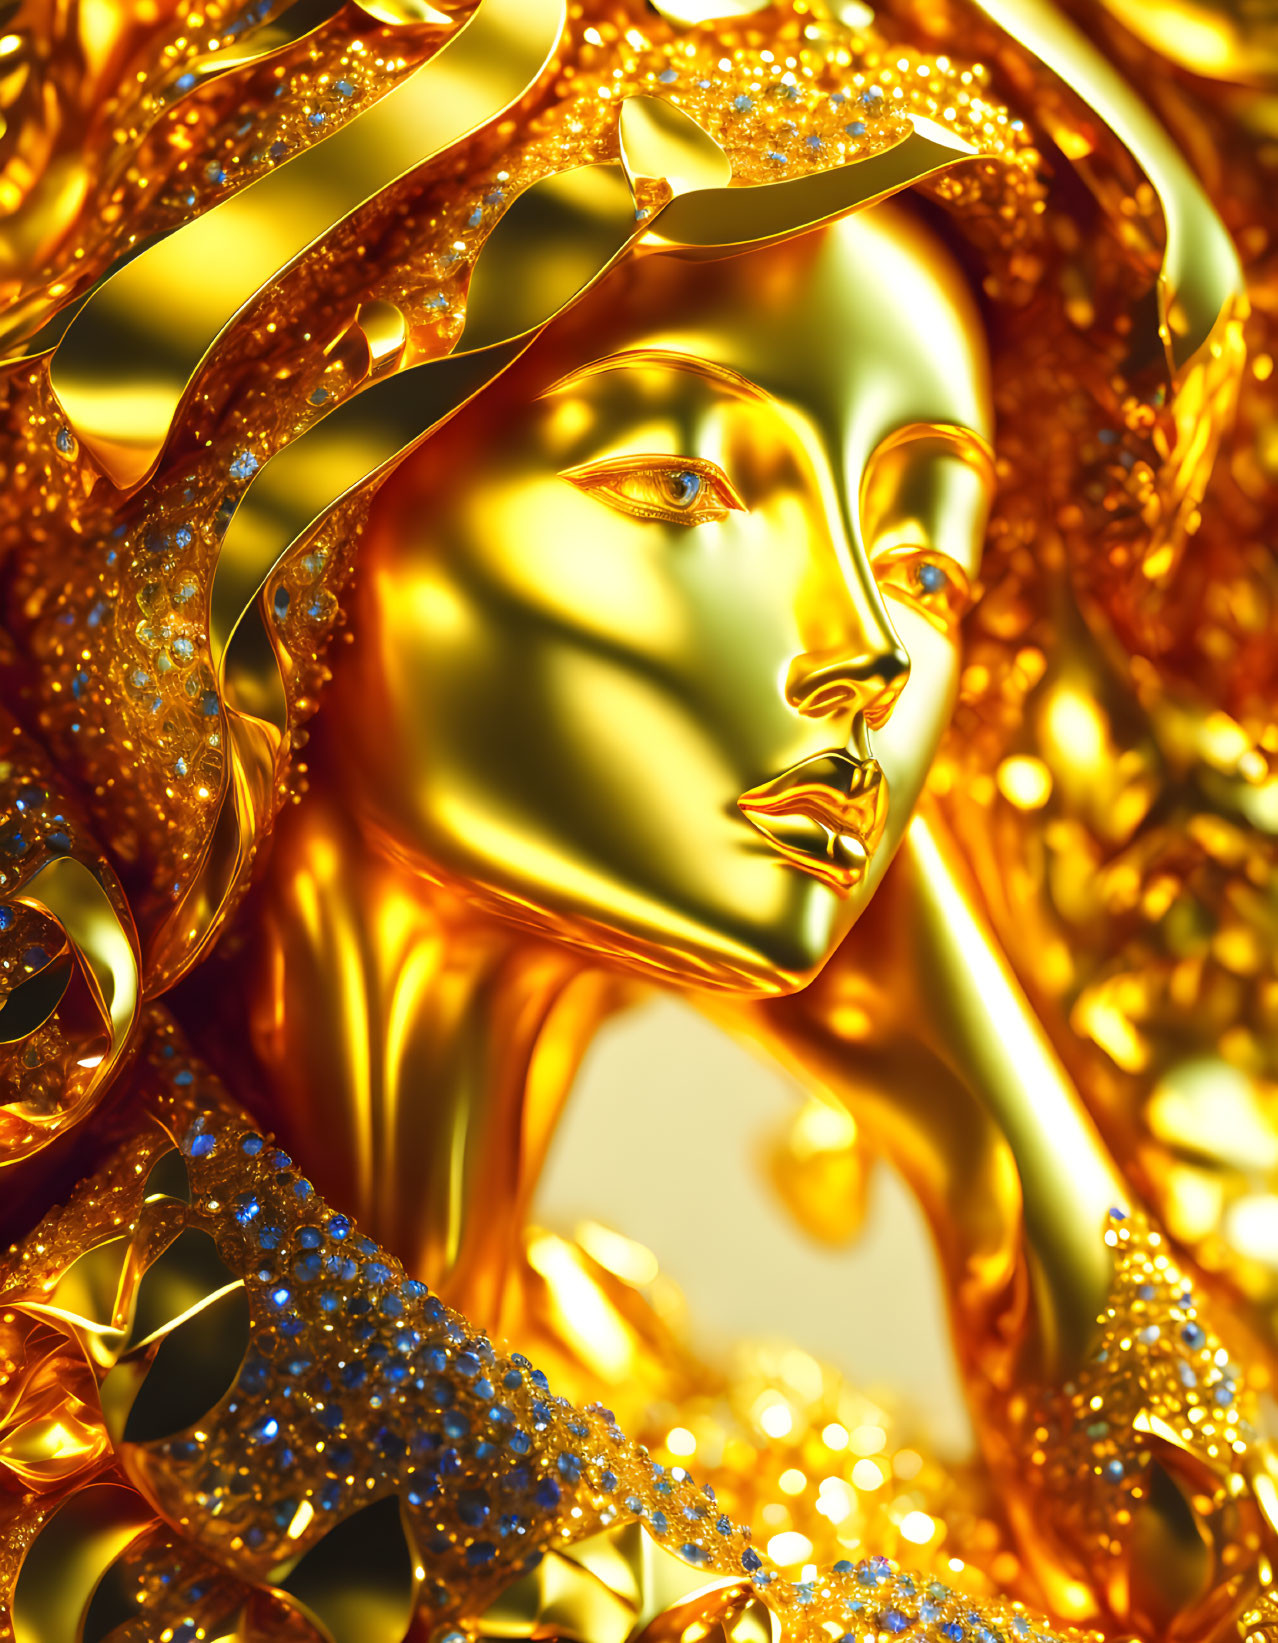 Luxurious golden metallic woman's face with intricate textures and sparkling adornments